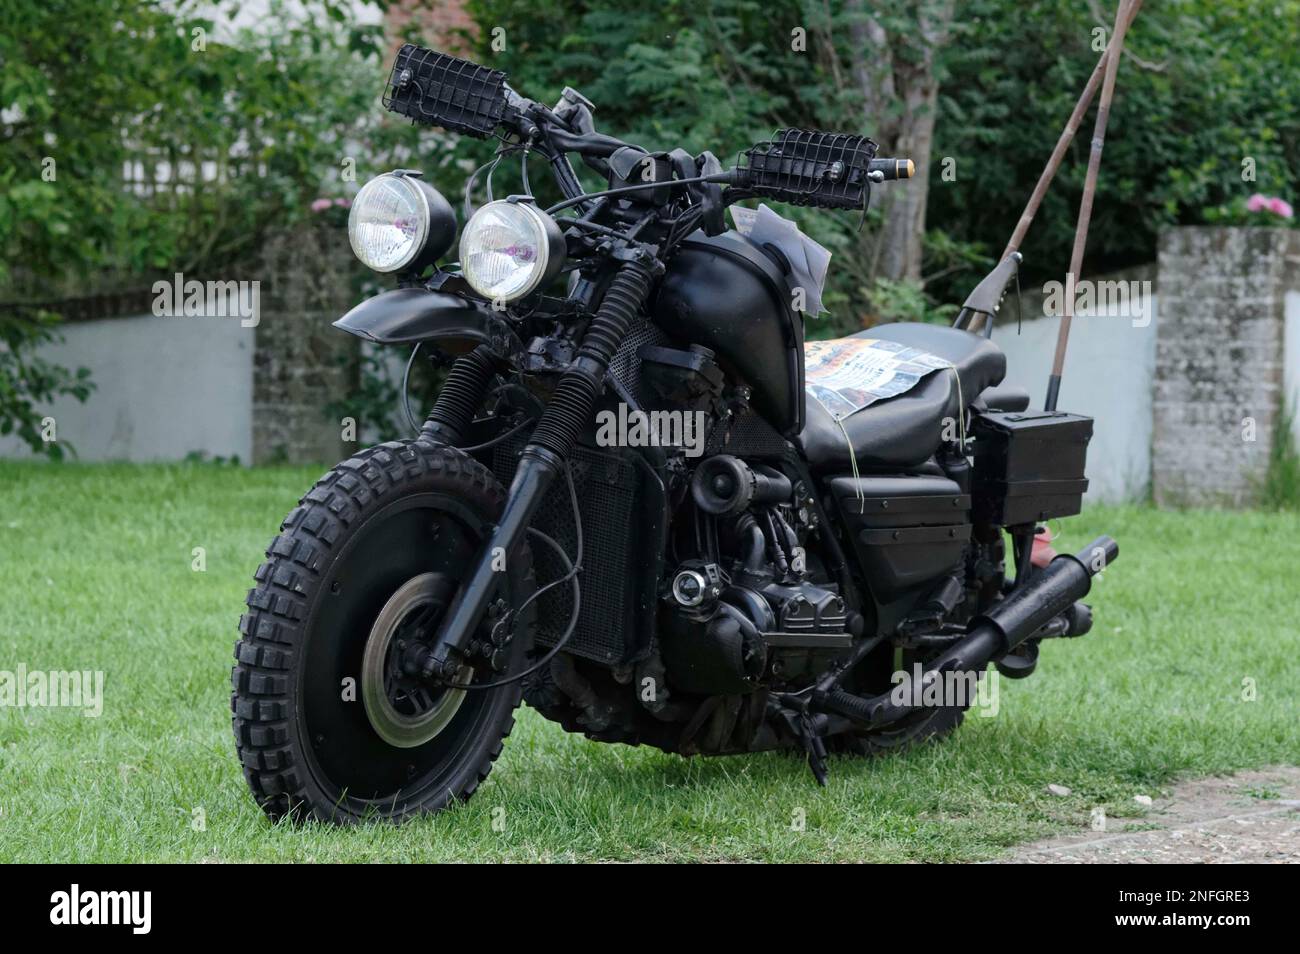 Honda Gold Wing customised survival bike with semi off-road tyres, twin headlights on stalks, hand guards and all over matt black paint job. Stock Photo